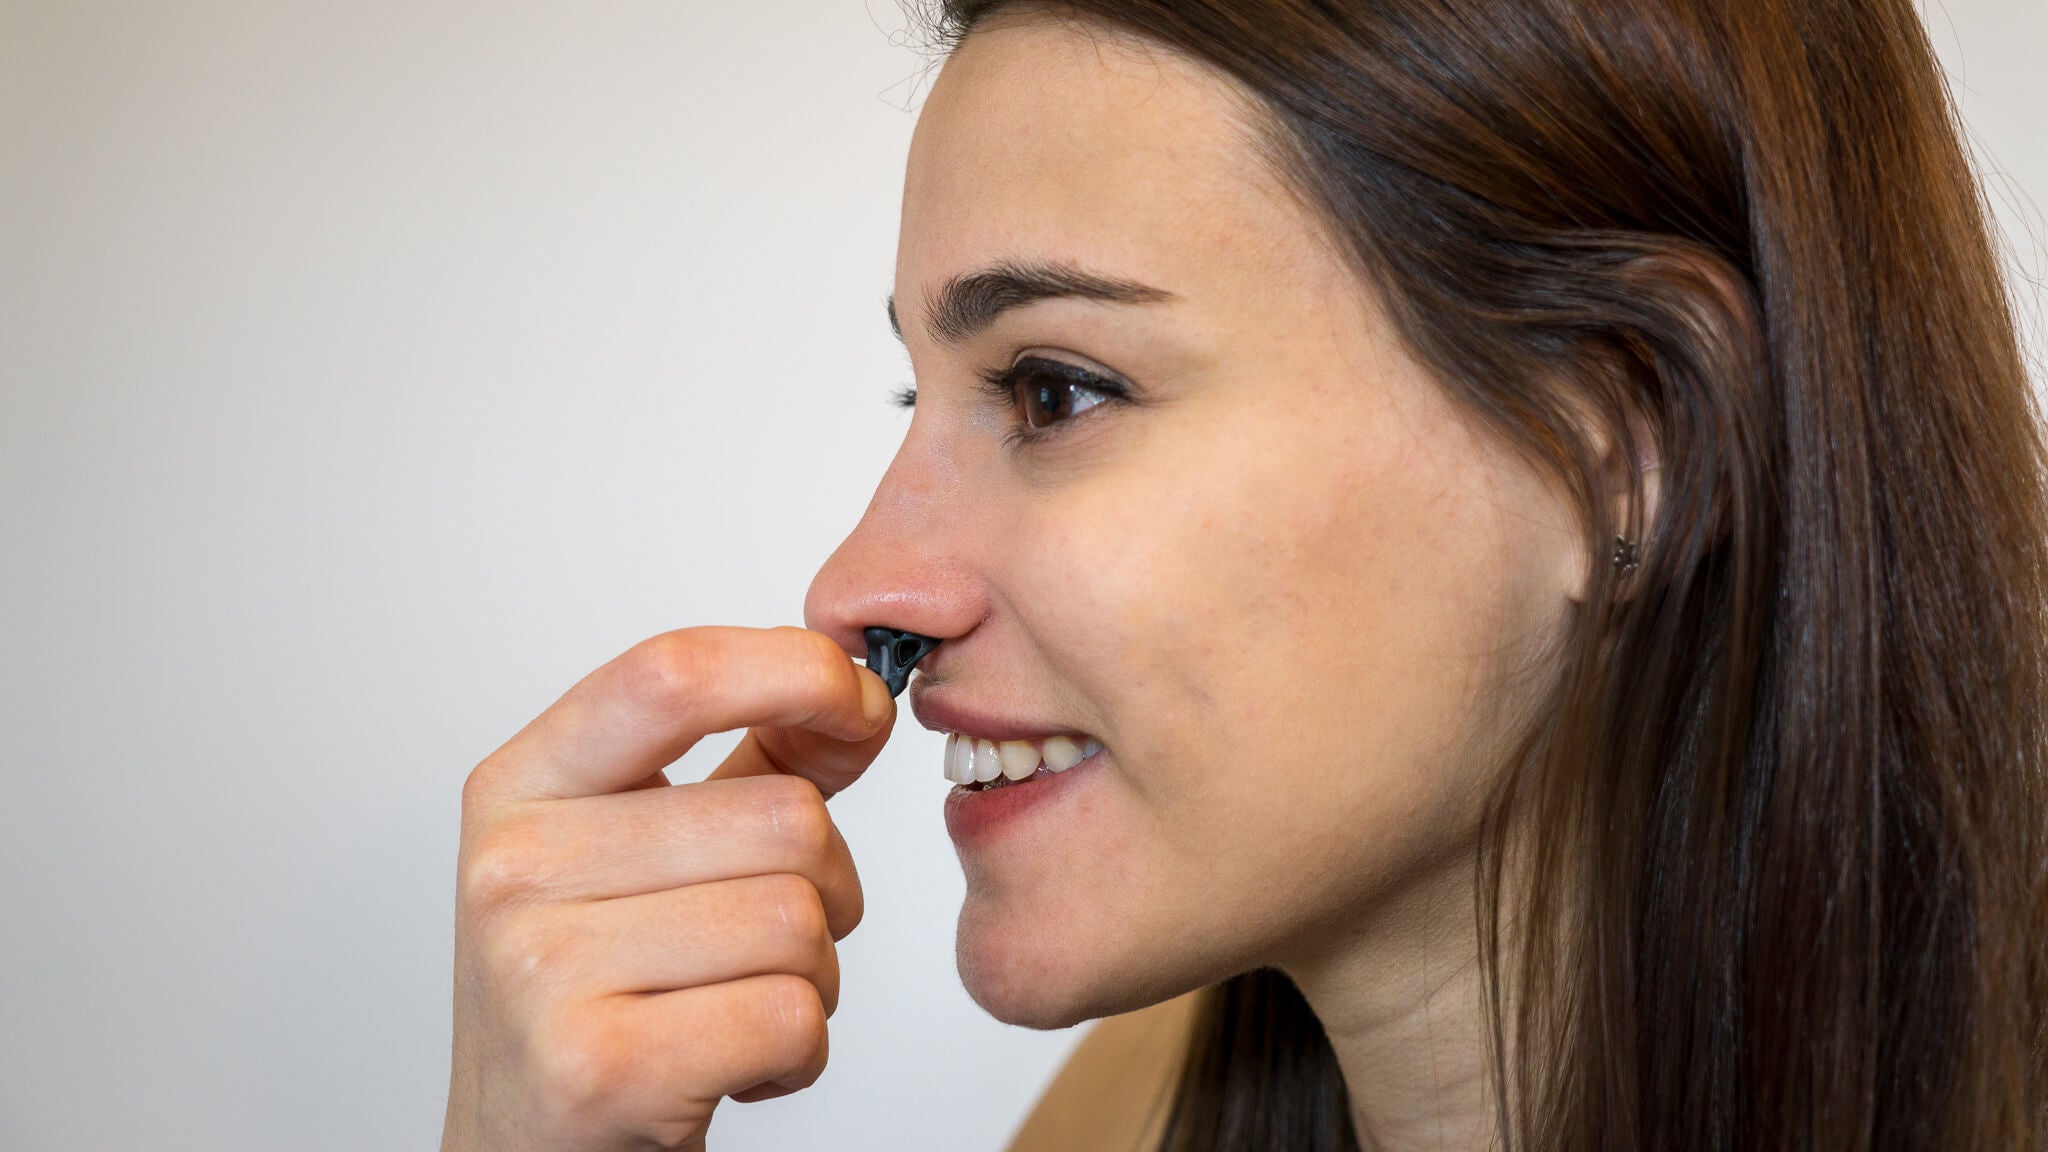 This Award-Winning New Device Instantly Improves Breathing & Reduces Snoring